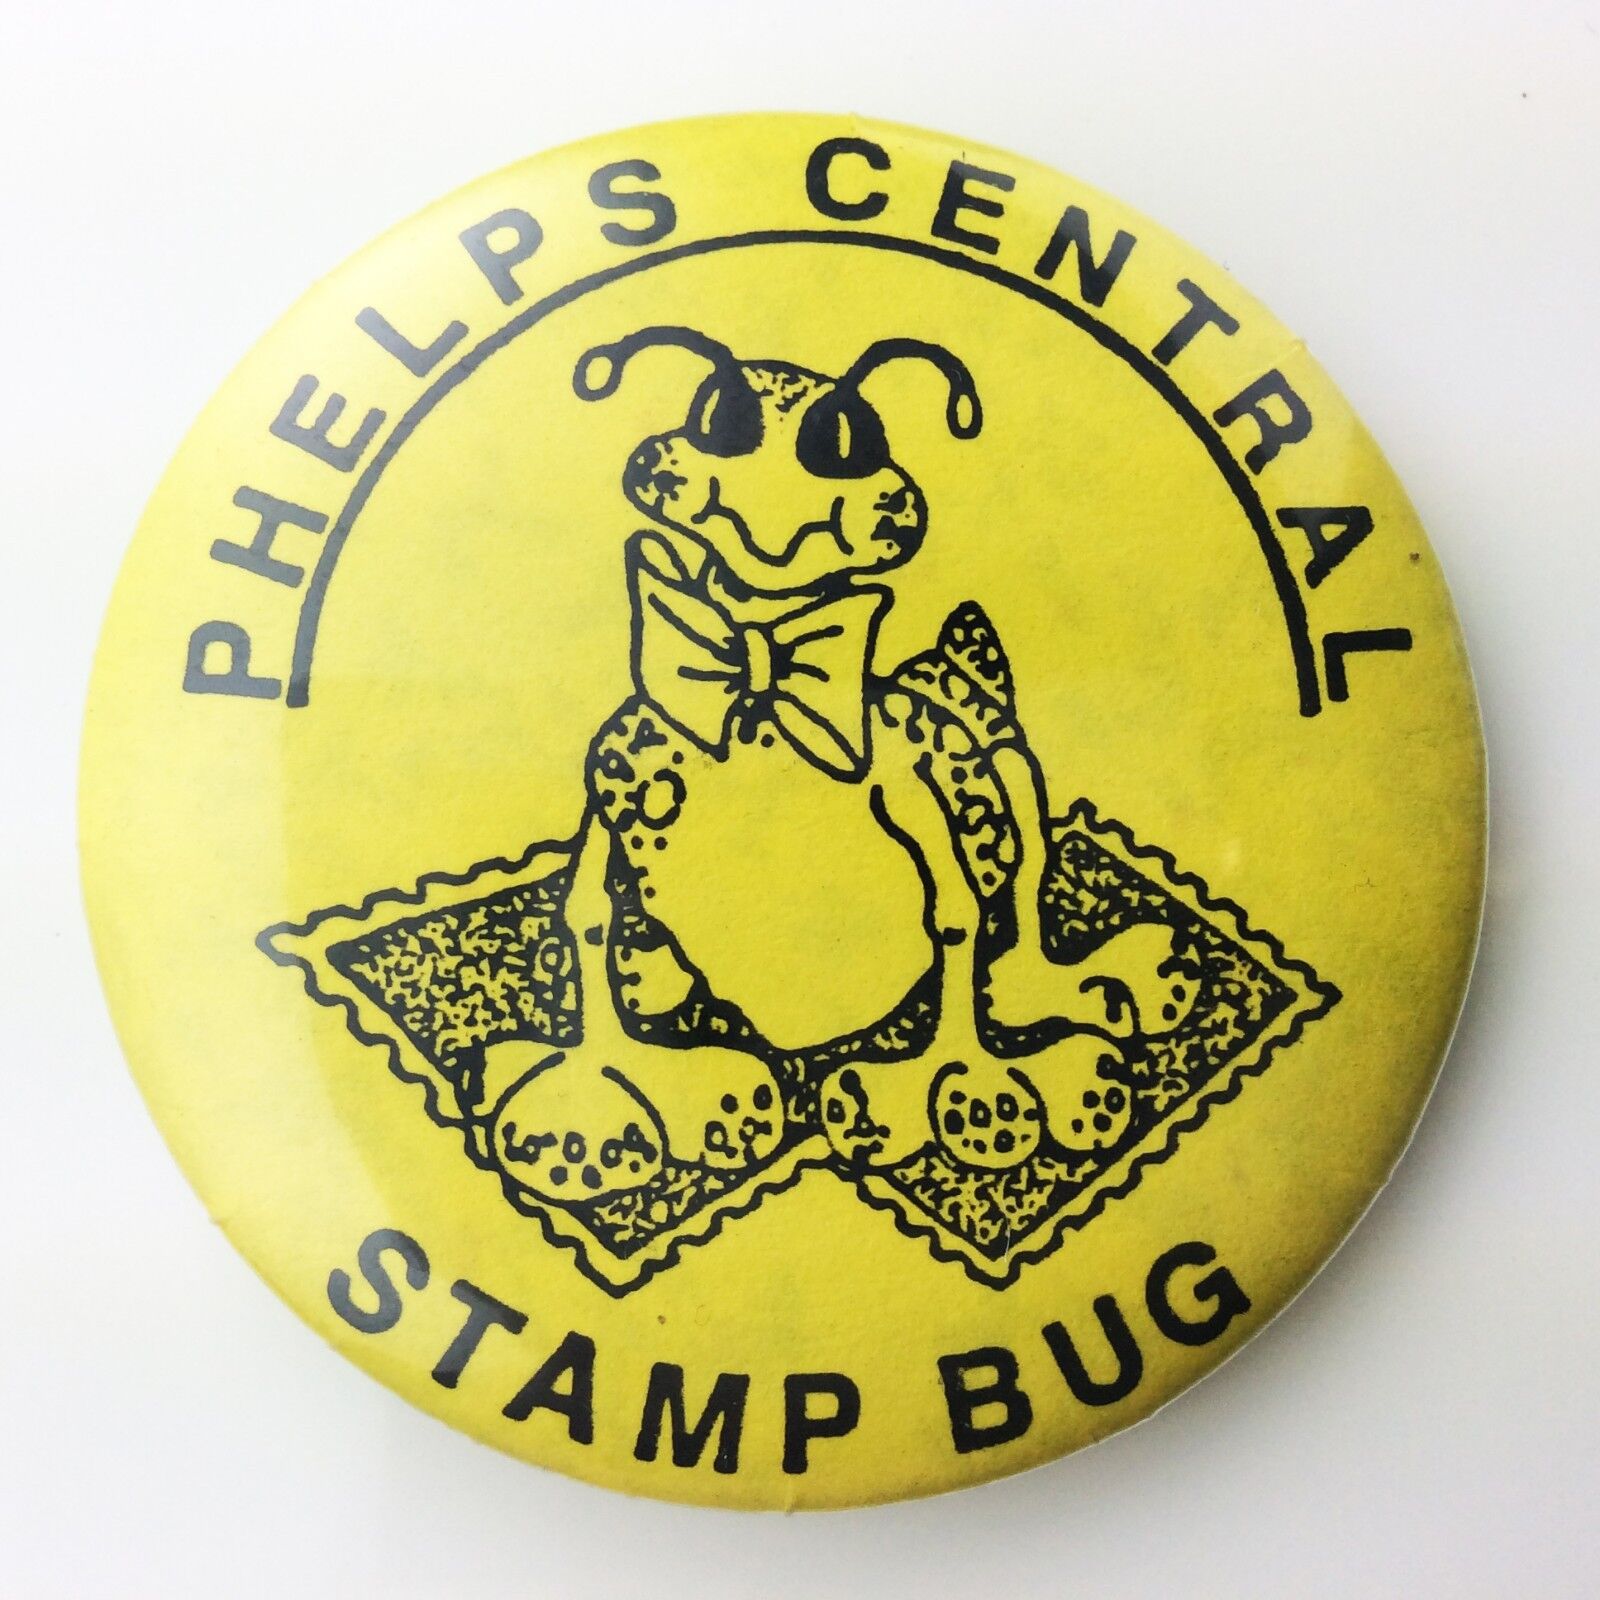 Phelps Central Stamp Bug Club Philatelic Pinback Button Pin Badge G807